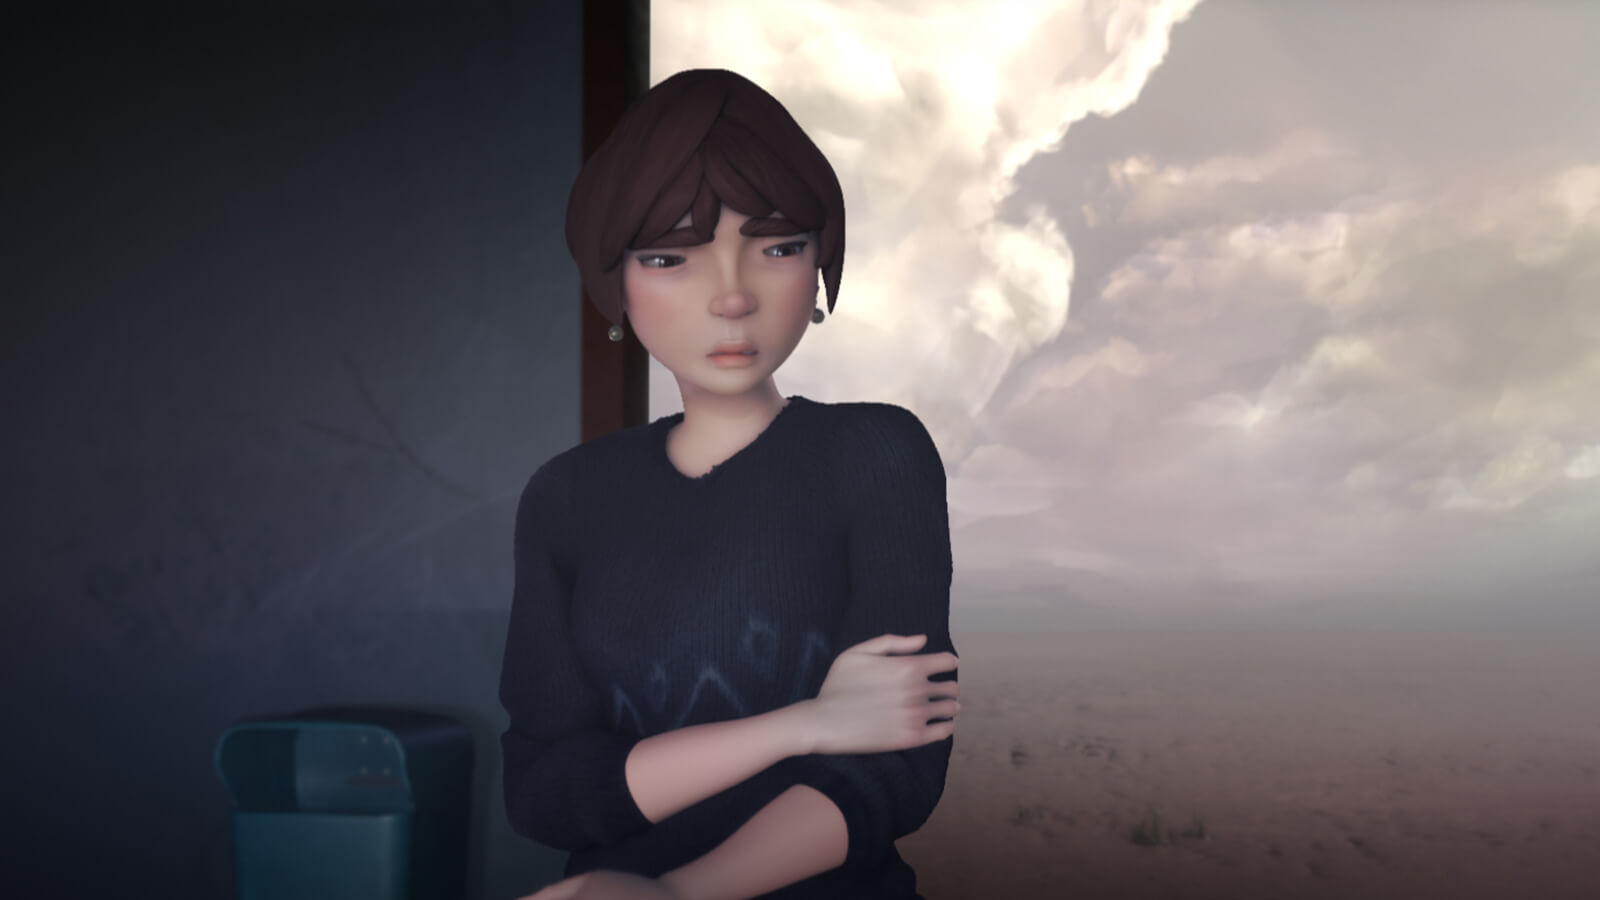 A CG image of a dispirited woman in a black sweater at an open-air train station. The landscape behind her is a barren desert